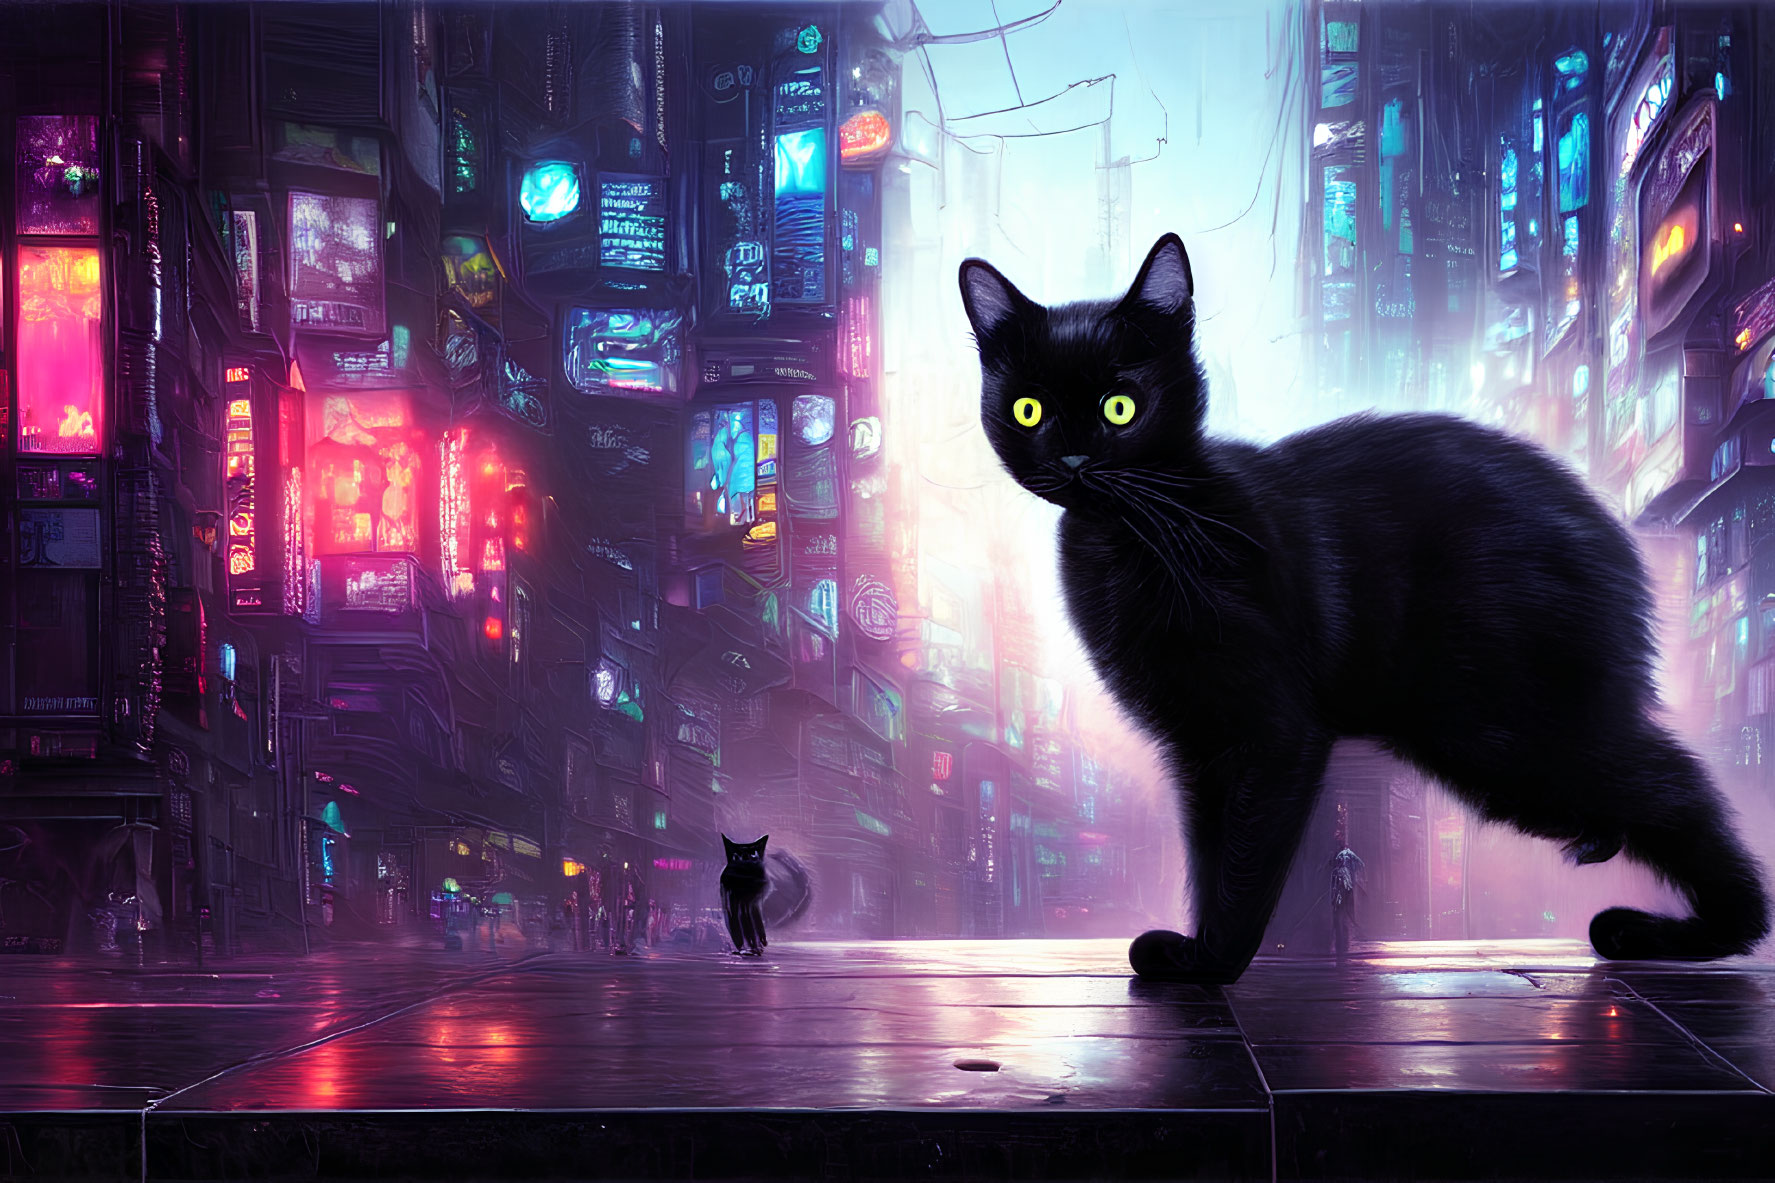 Black Cat with Luminous Yellow Eyes in Neon-Lit Urban Alley